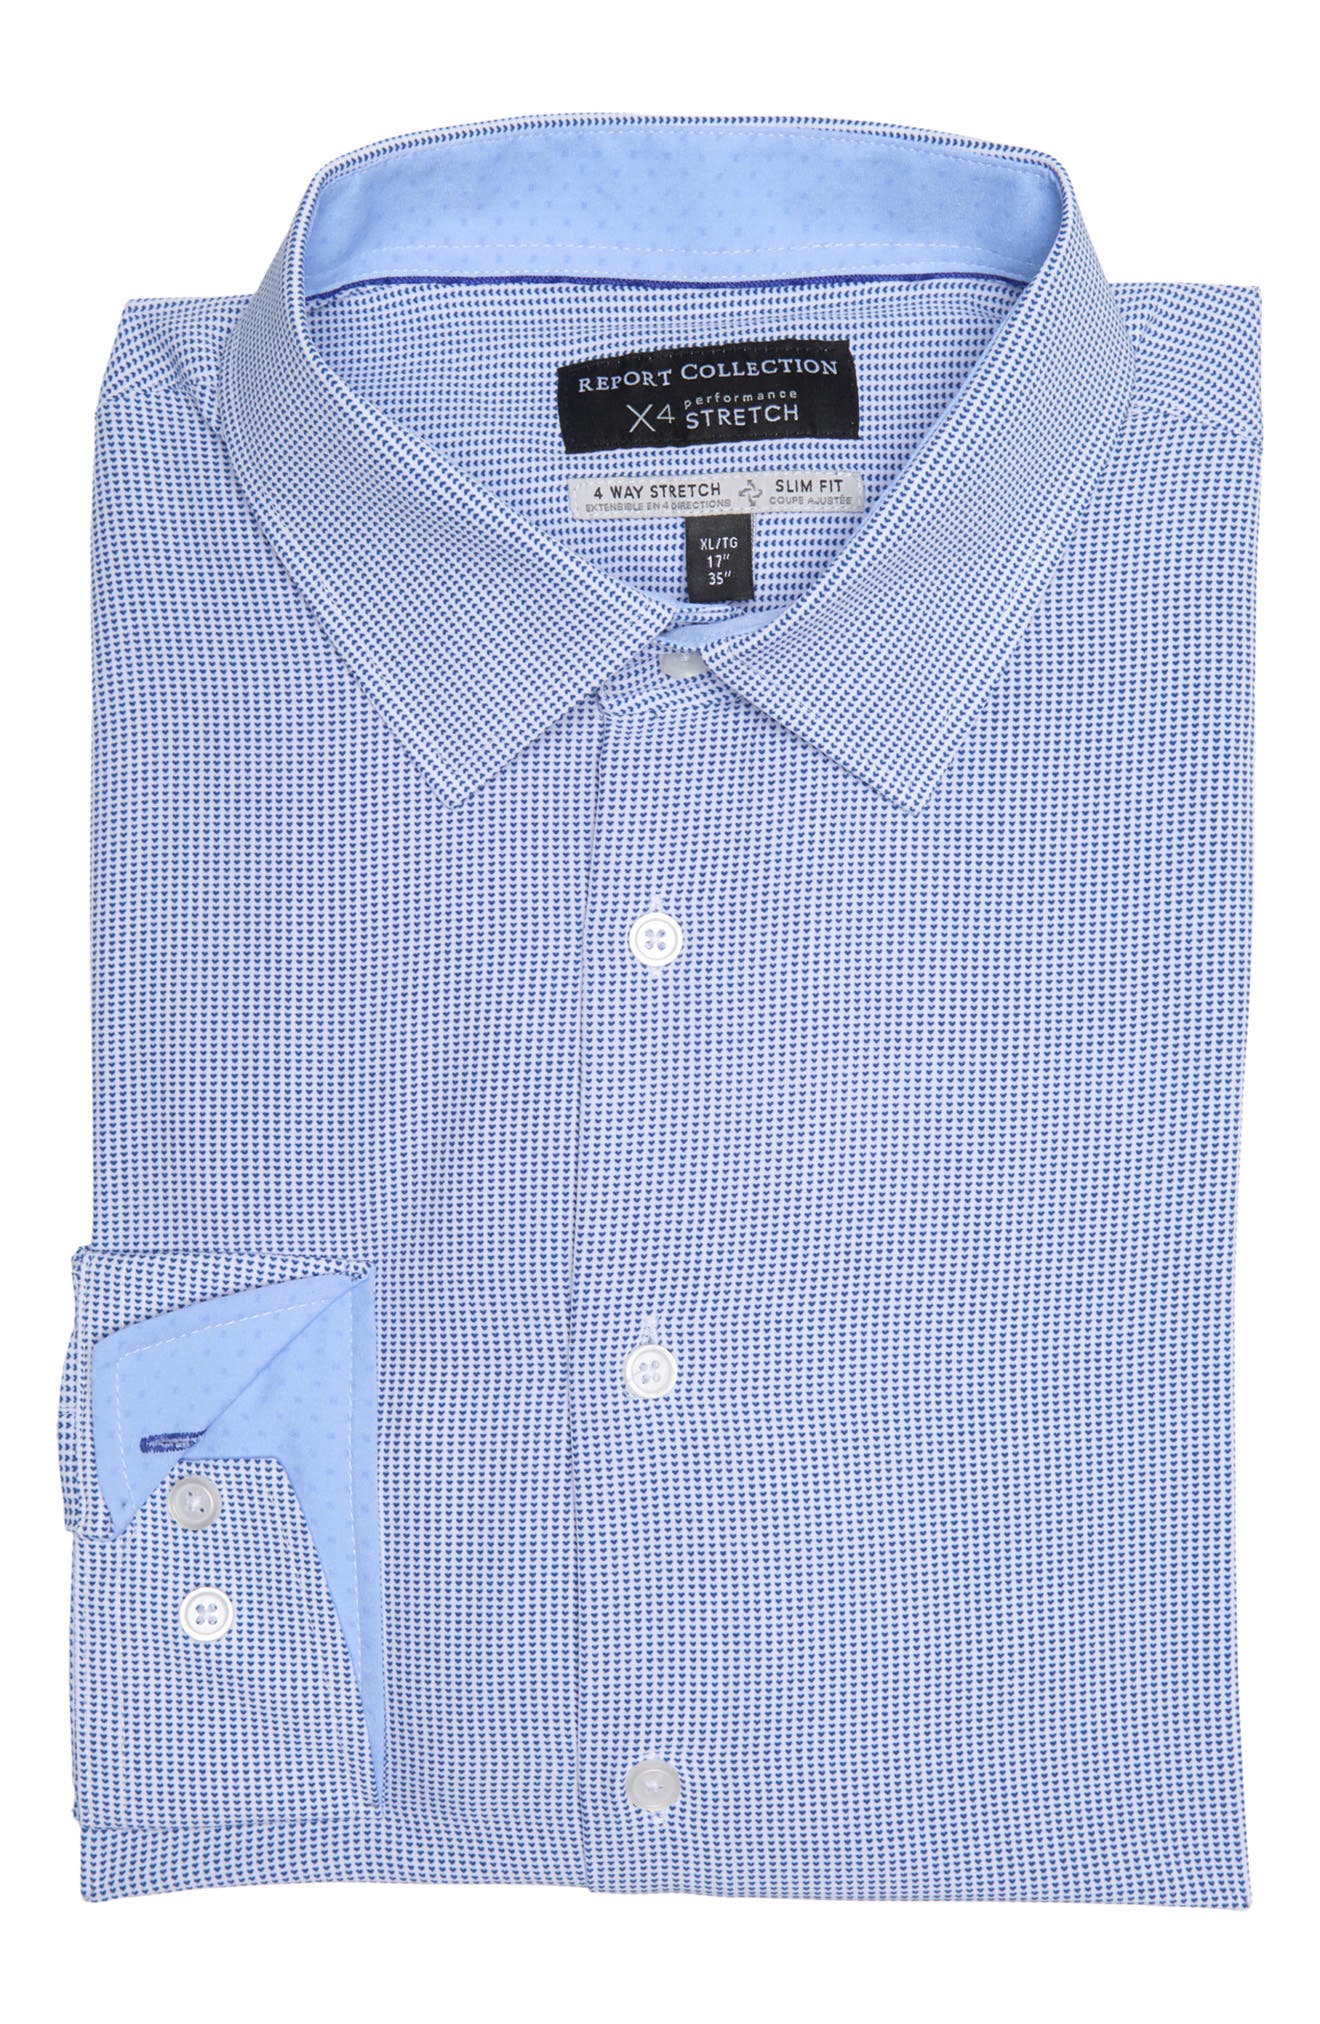 Report Collection Dress Shirts ...